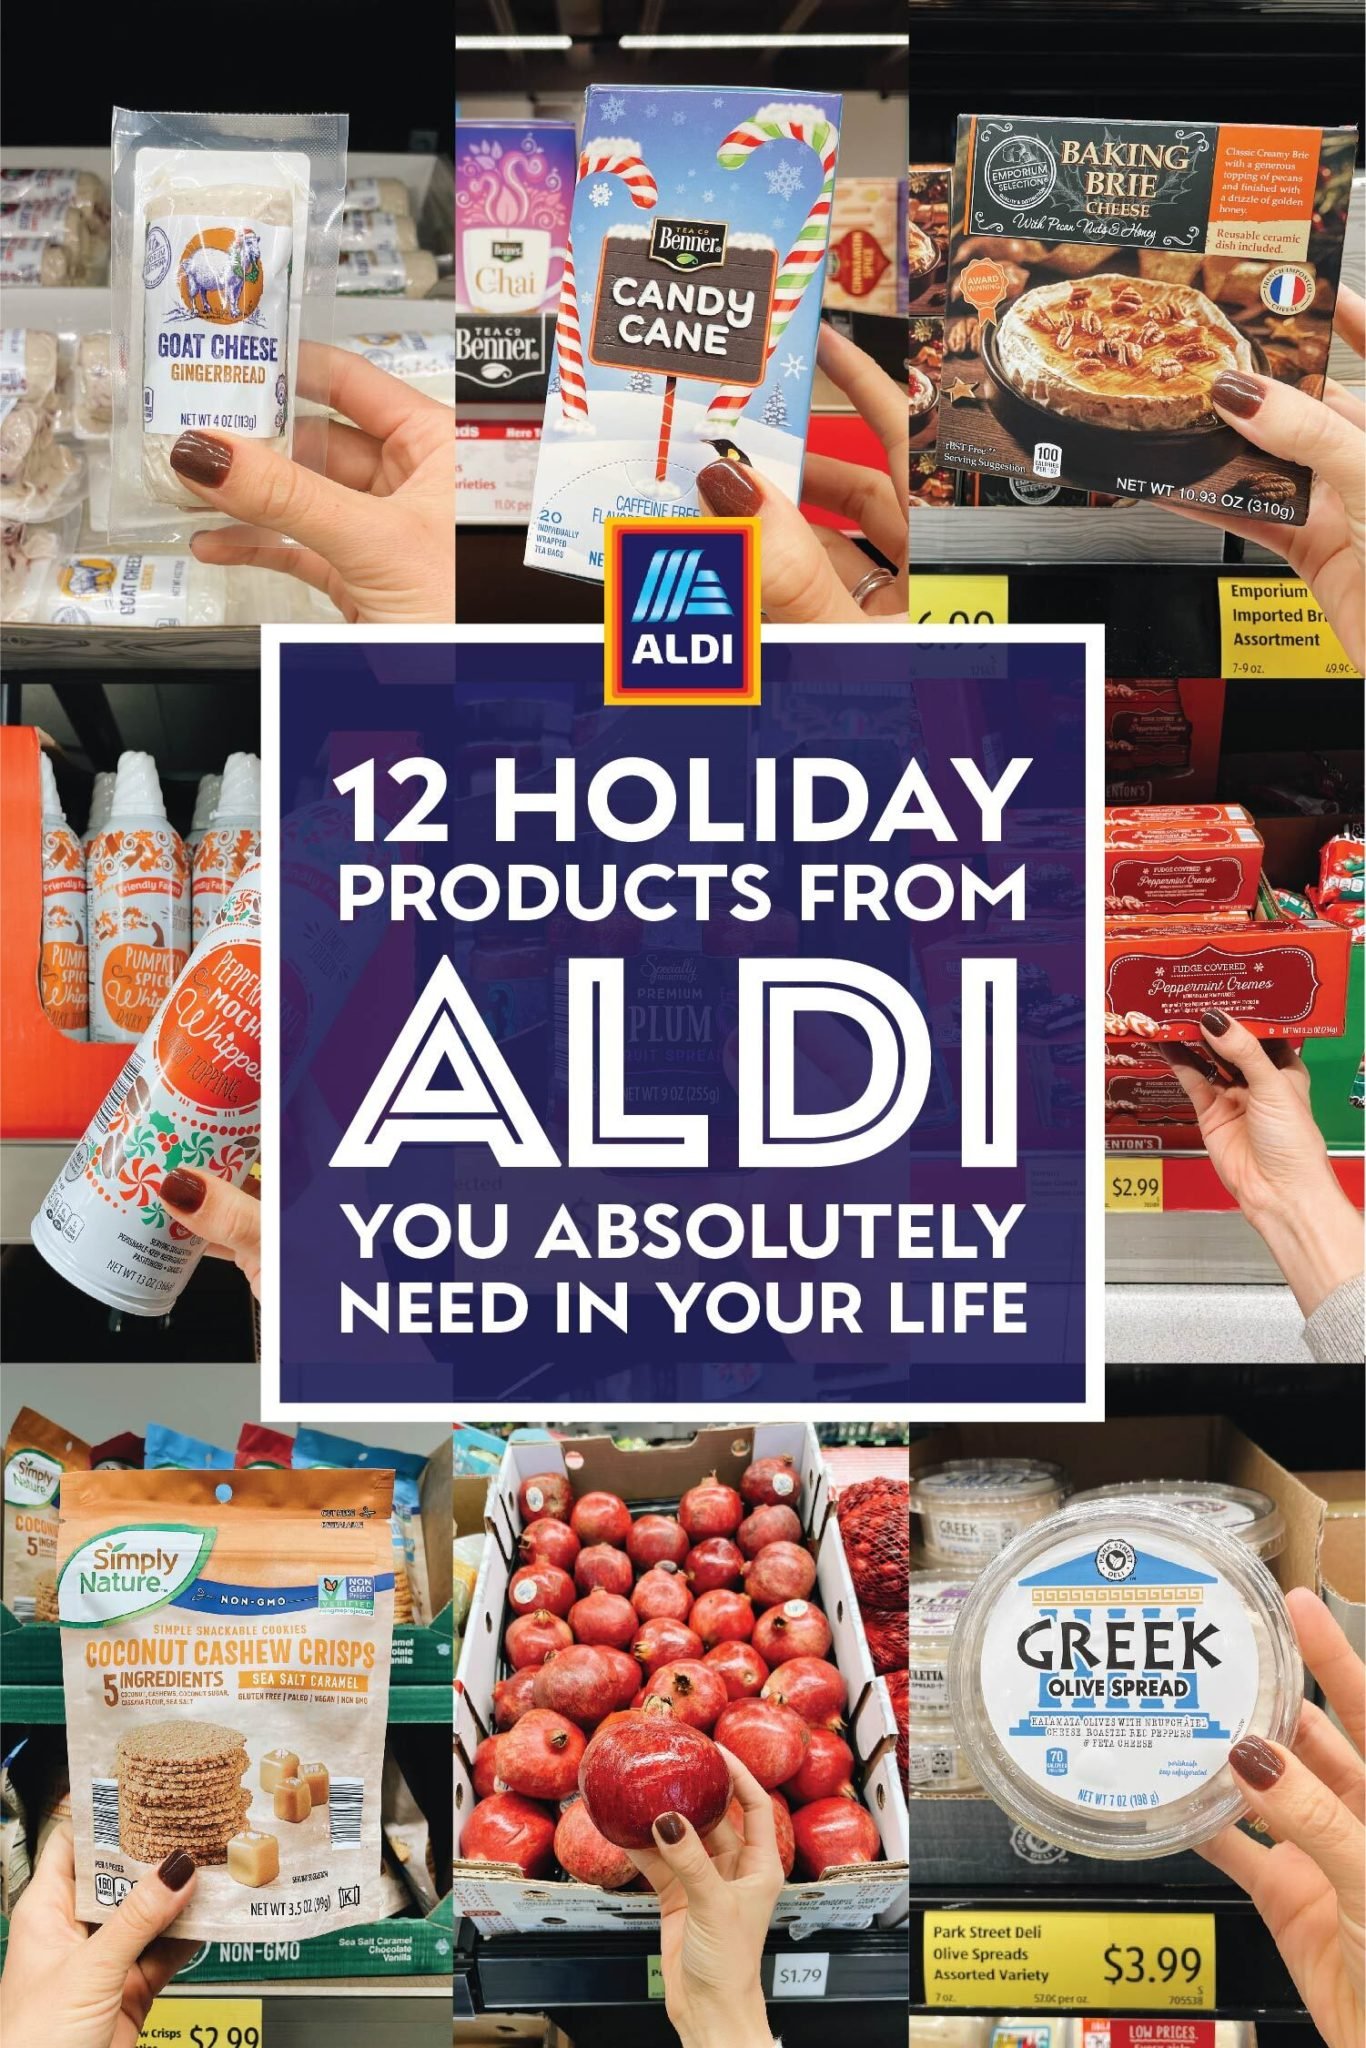 I Tried All of the Holiday Products at ALDI, and These Are The 12 Items